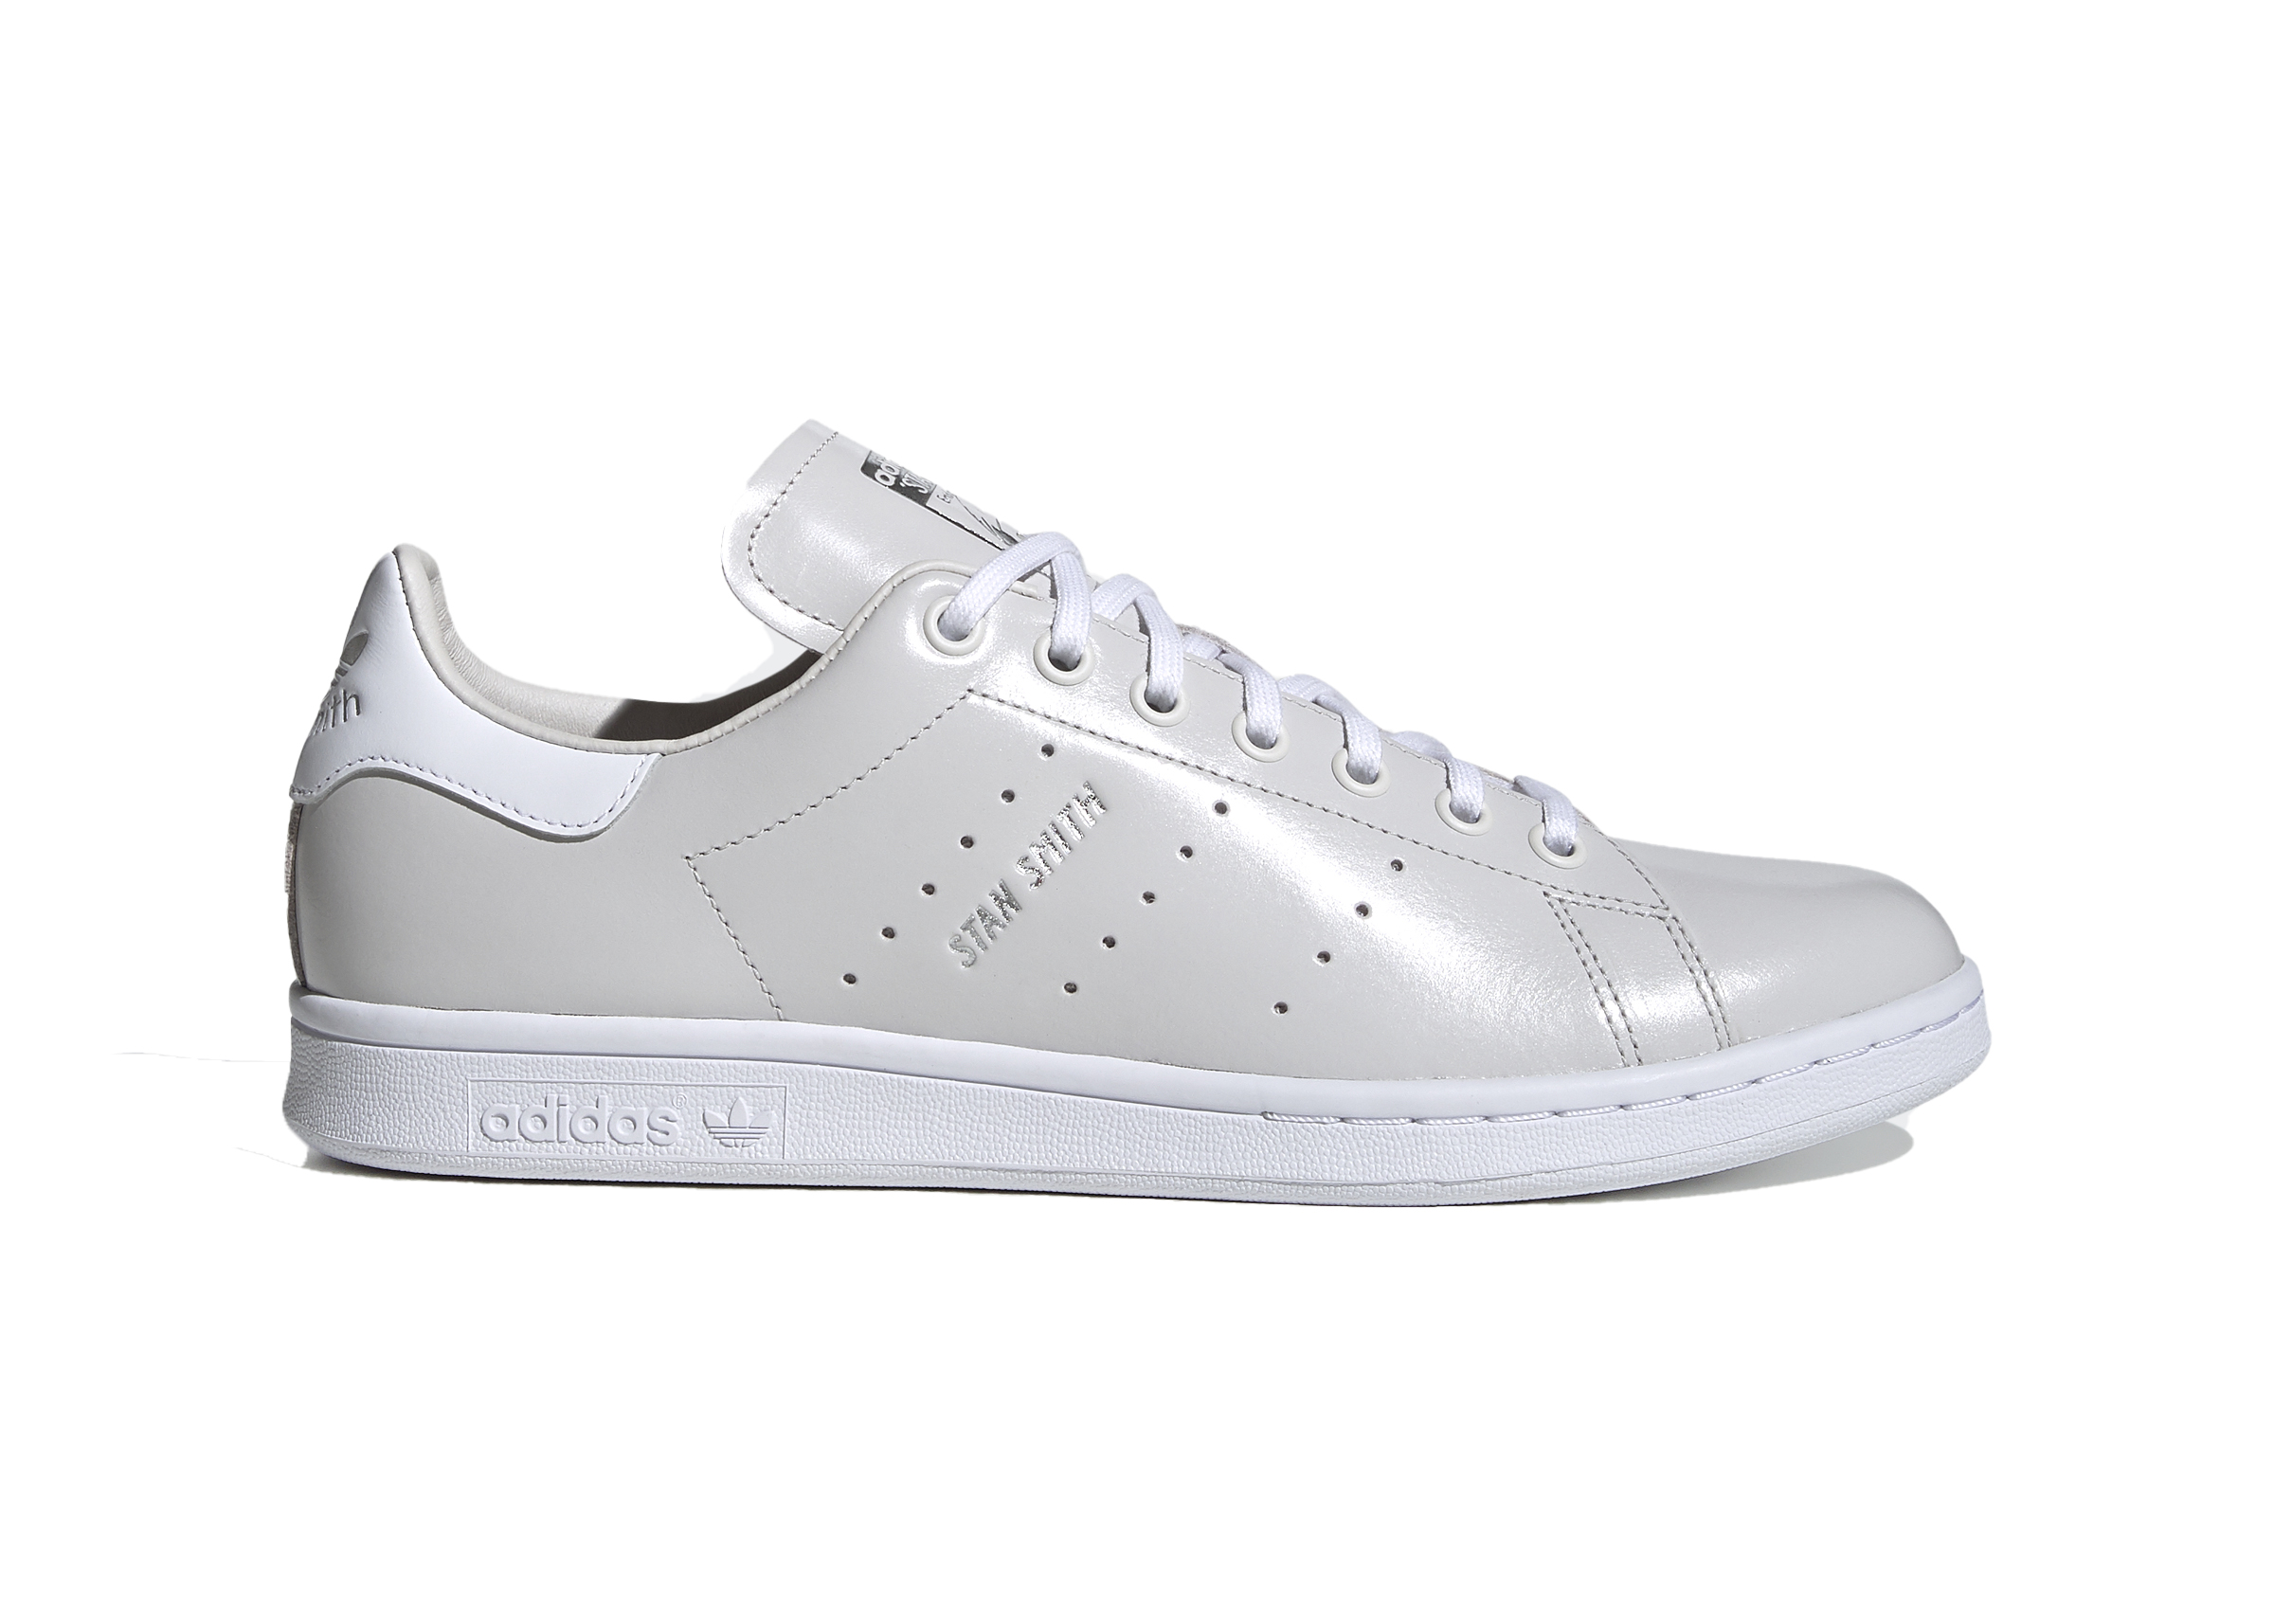 stan smith shoes grey